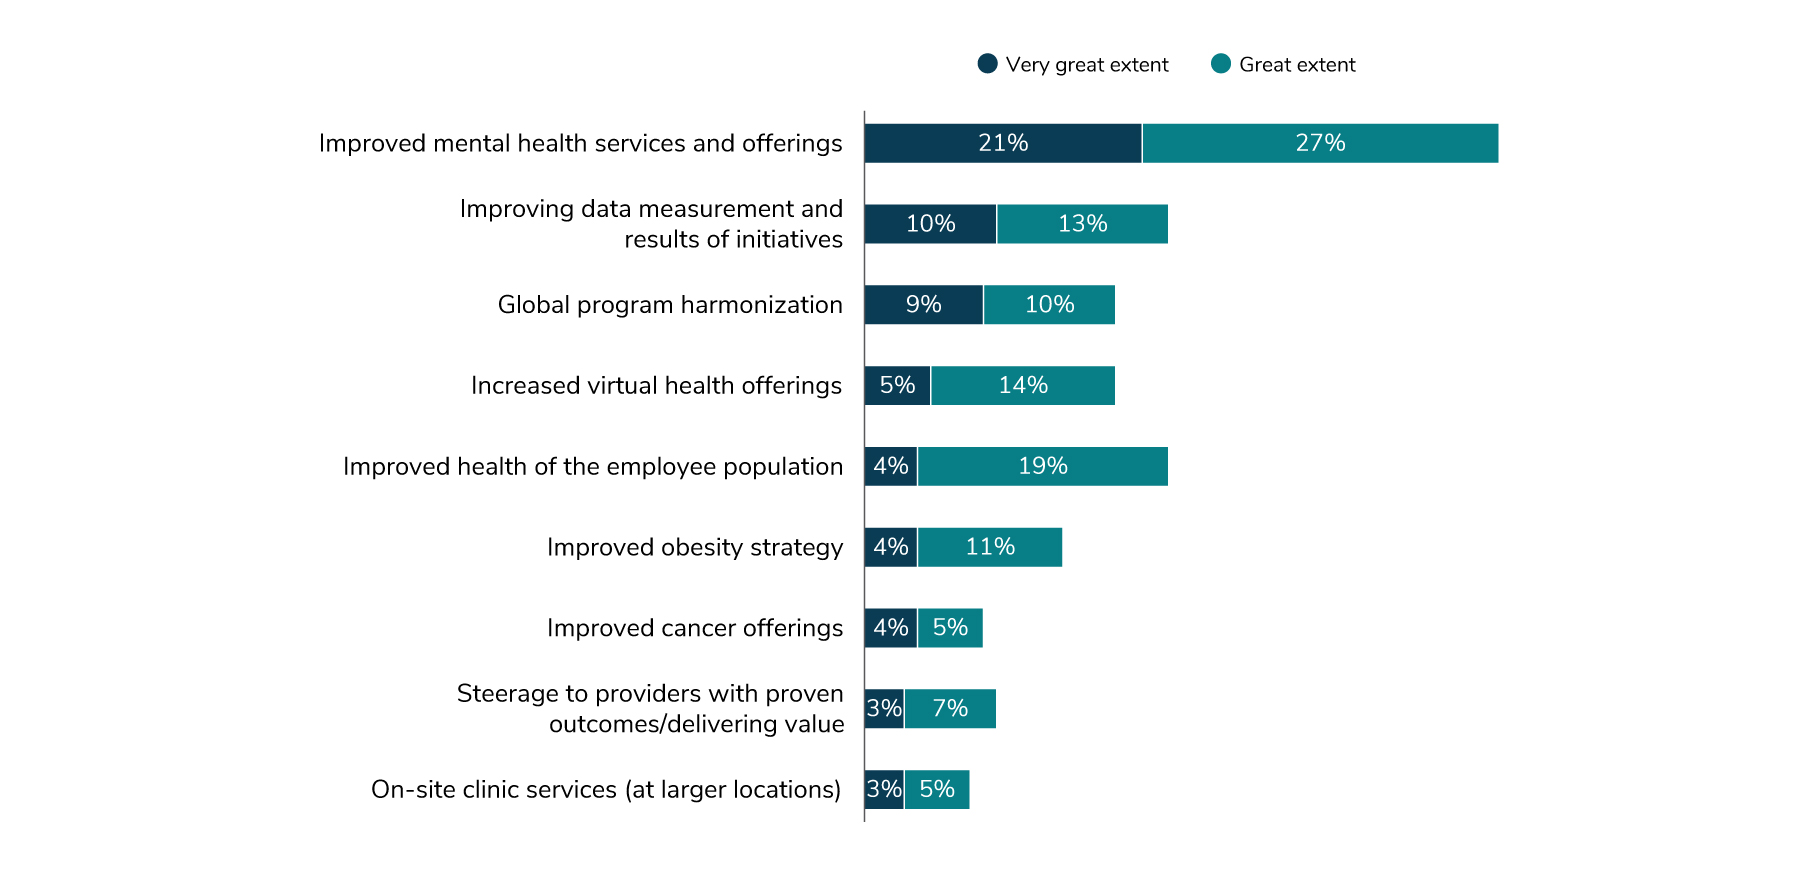 48% of employers are pursuing to a great or very great extend improving mental health services and offerings globally. 23% are pursuing improved data measurement. 19% are pursuing global program harmonization. 23% are pursuing improved employee population health. 15% are pursuing an improved obesity strategy. 9% are pursuing improved cancer offerings.